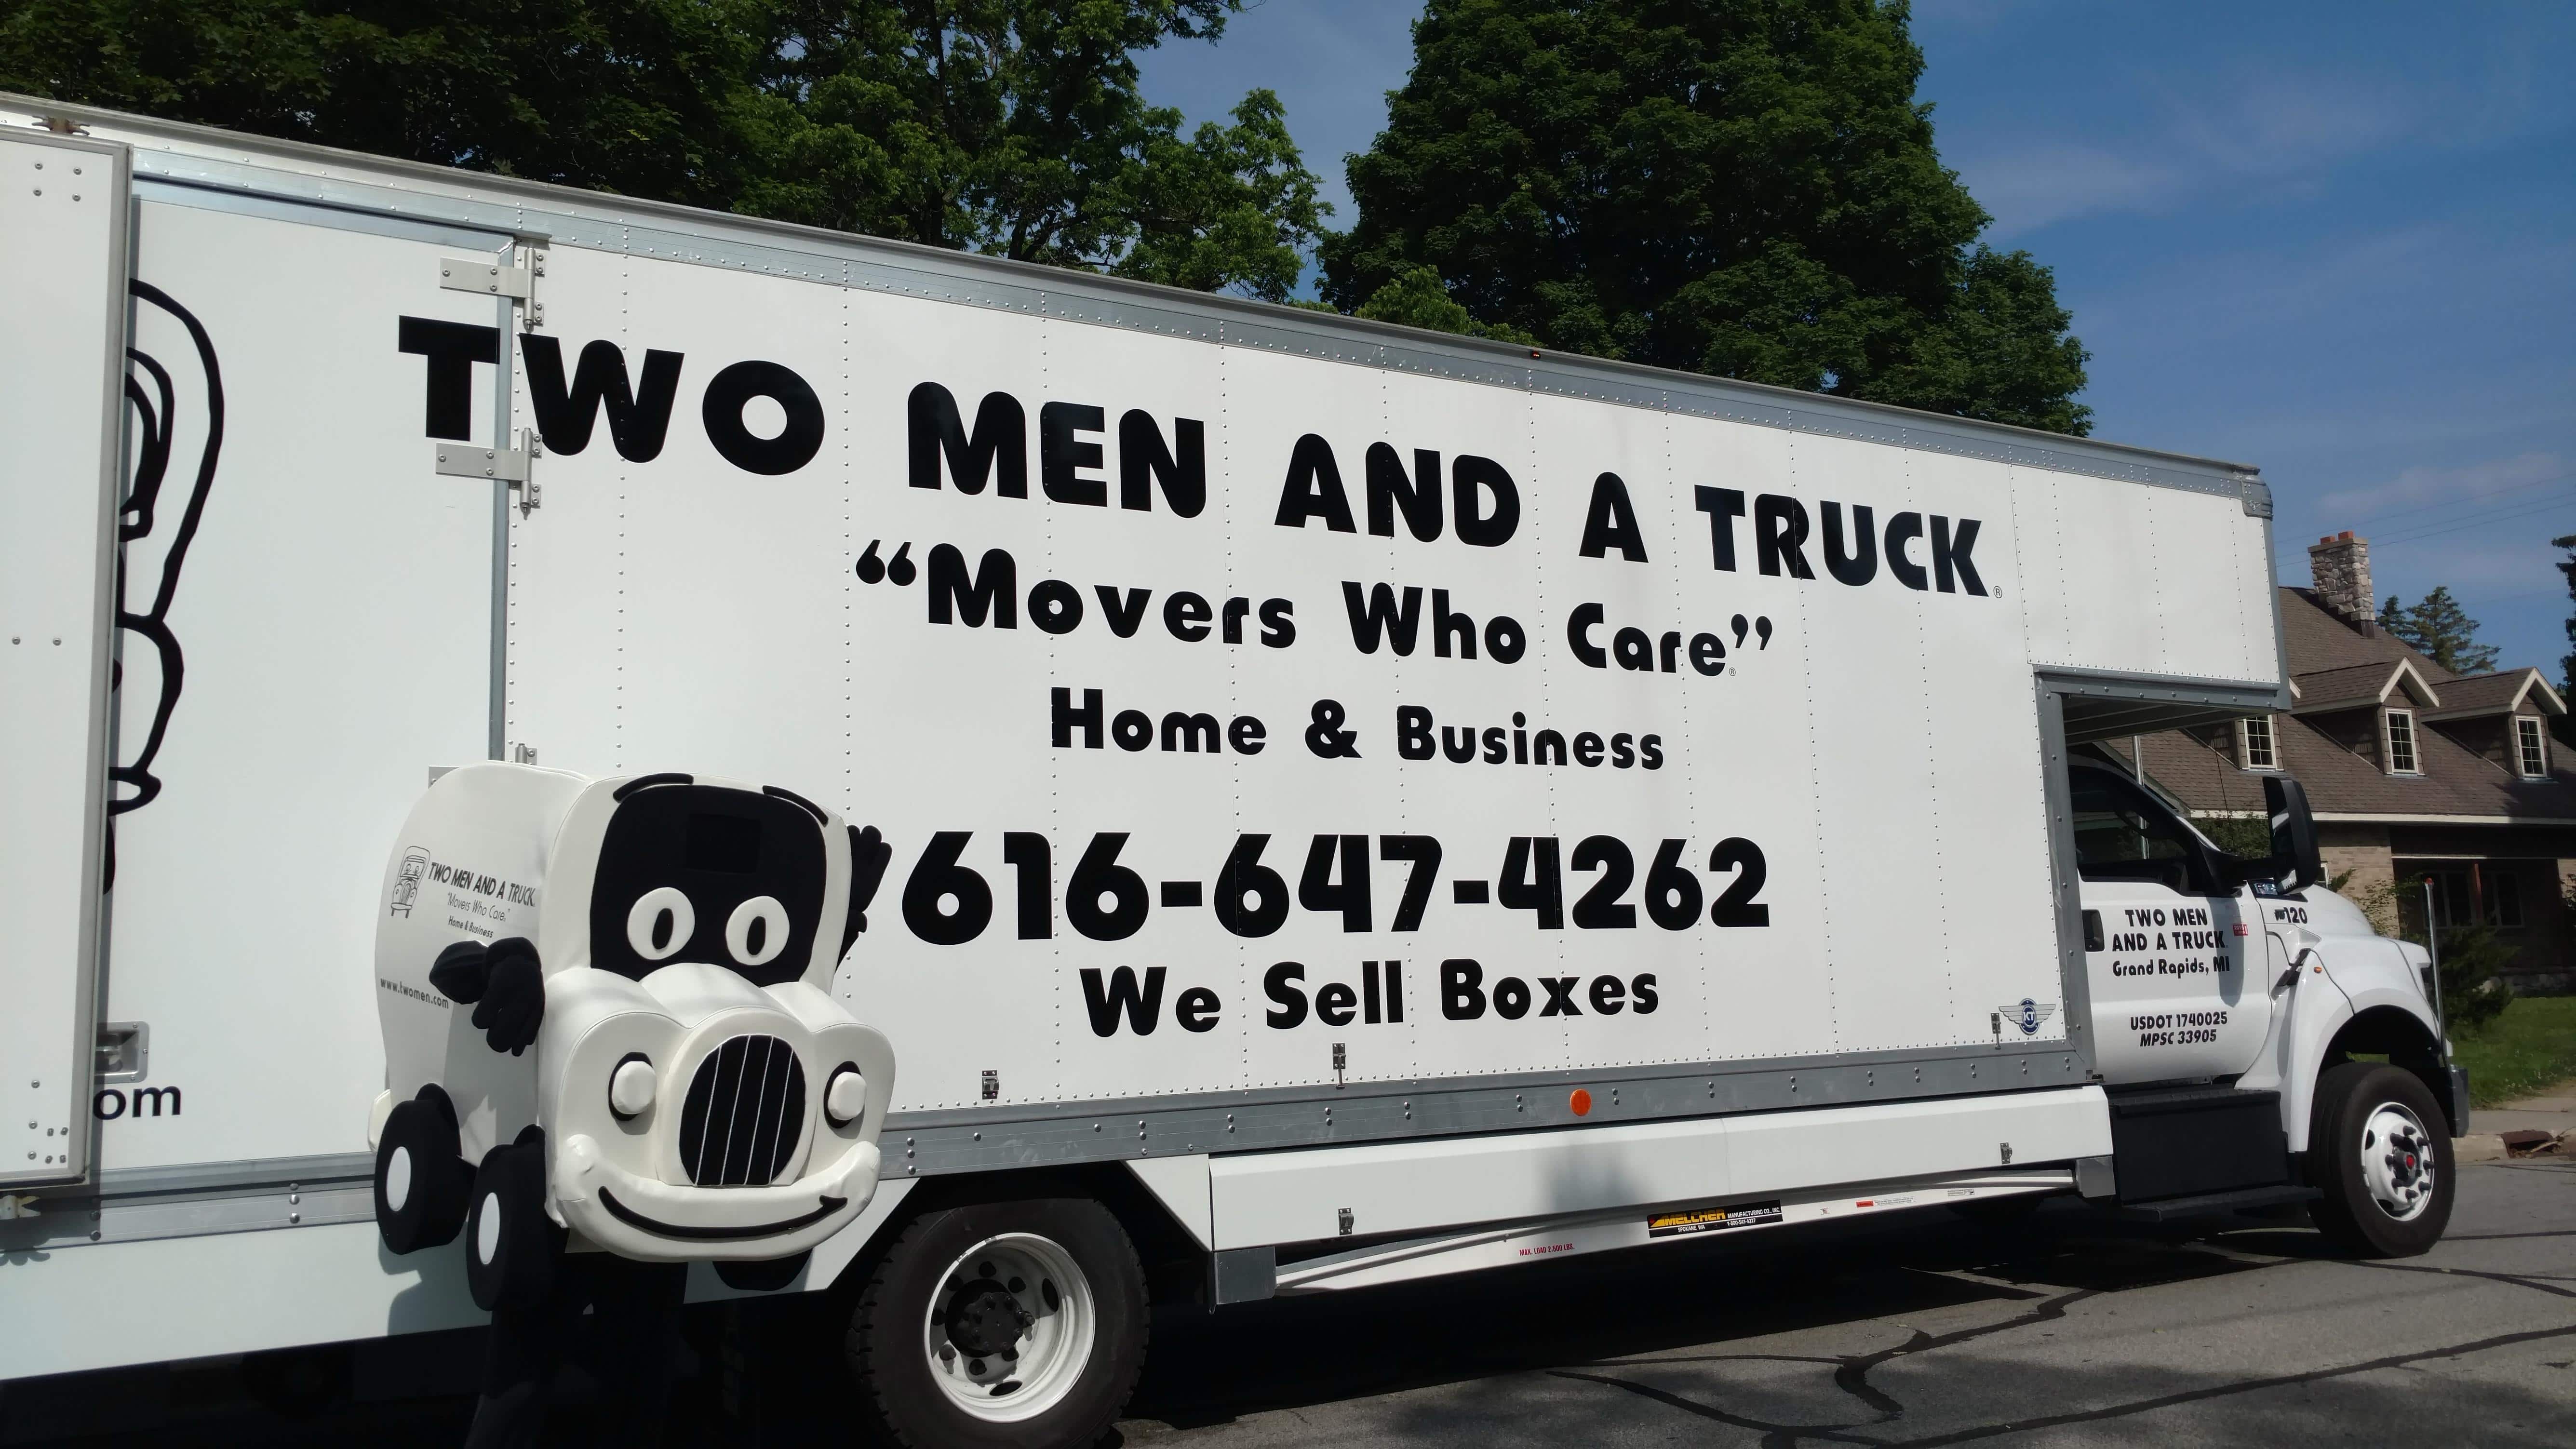 Two Men and a Truck - Warsaw (IN 46580), US, movers near me